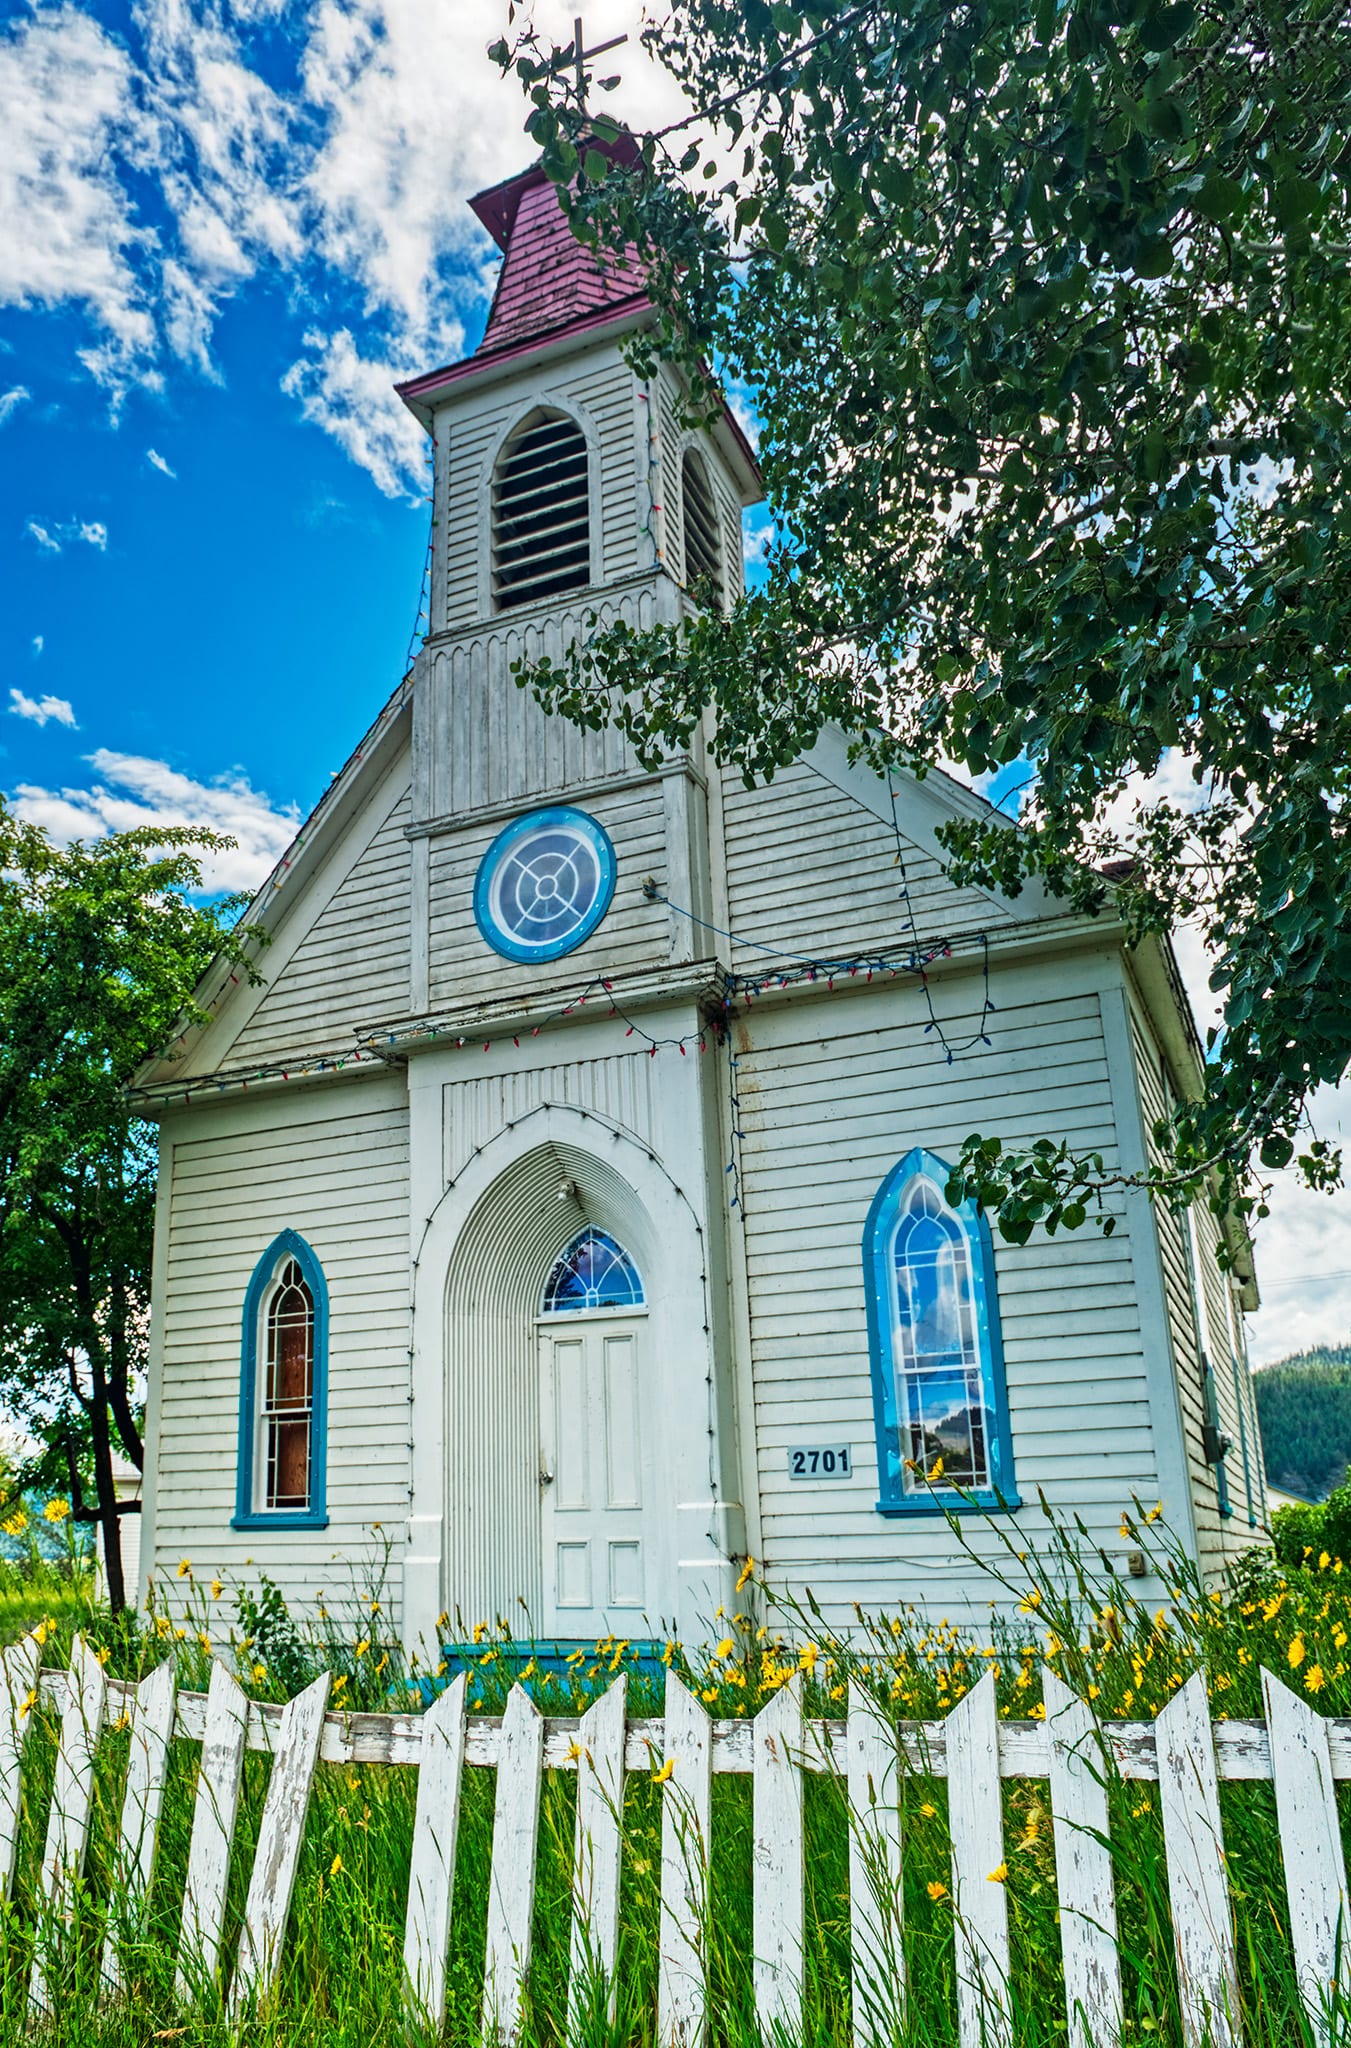 The historic Sugar Cane Church on the Williams Lake Indian Reservation #1 at the head of Williams Lake, British Columbia, Canada.
Last example of Cariboo-style Native villiage church architecture from this era, built 1895.